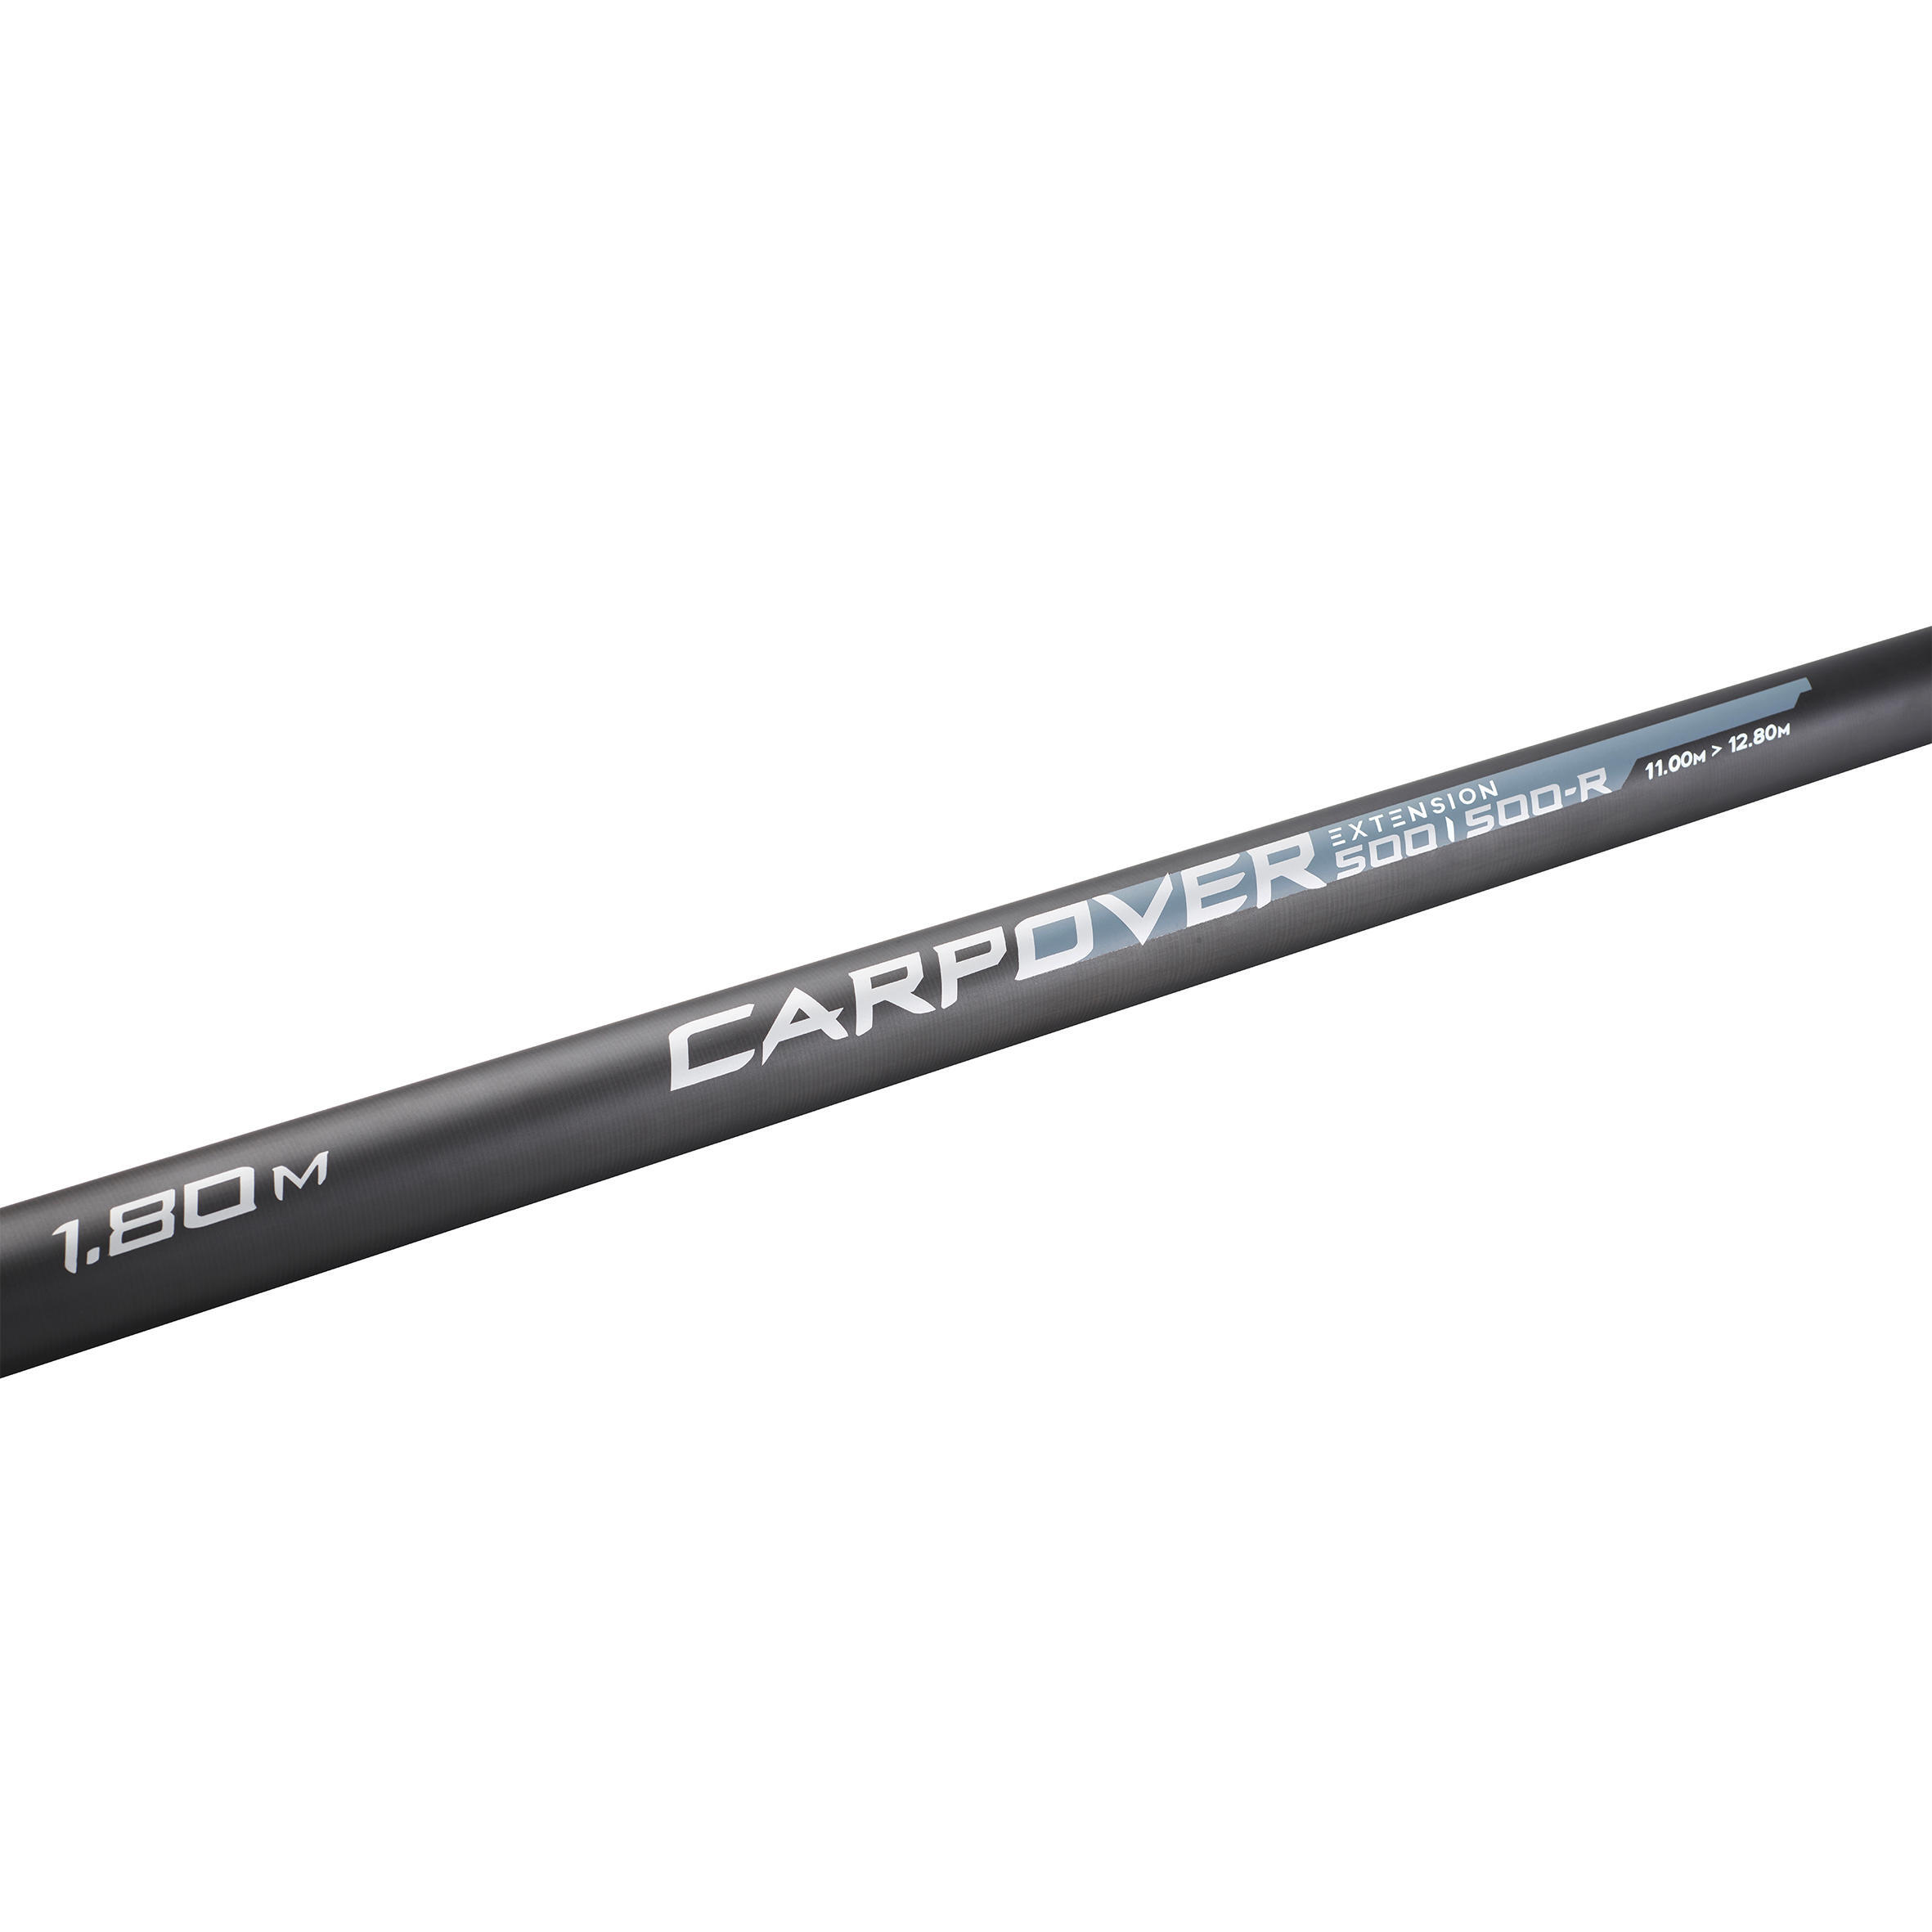 Refurbished Extension 1.8m For Rods Carpover -B Grade 3/7